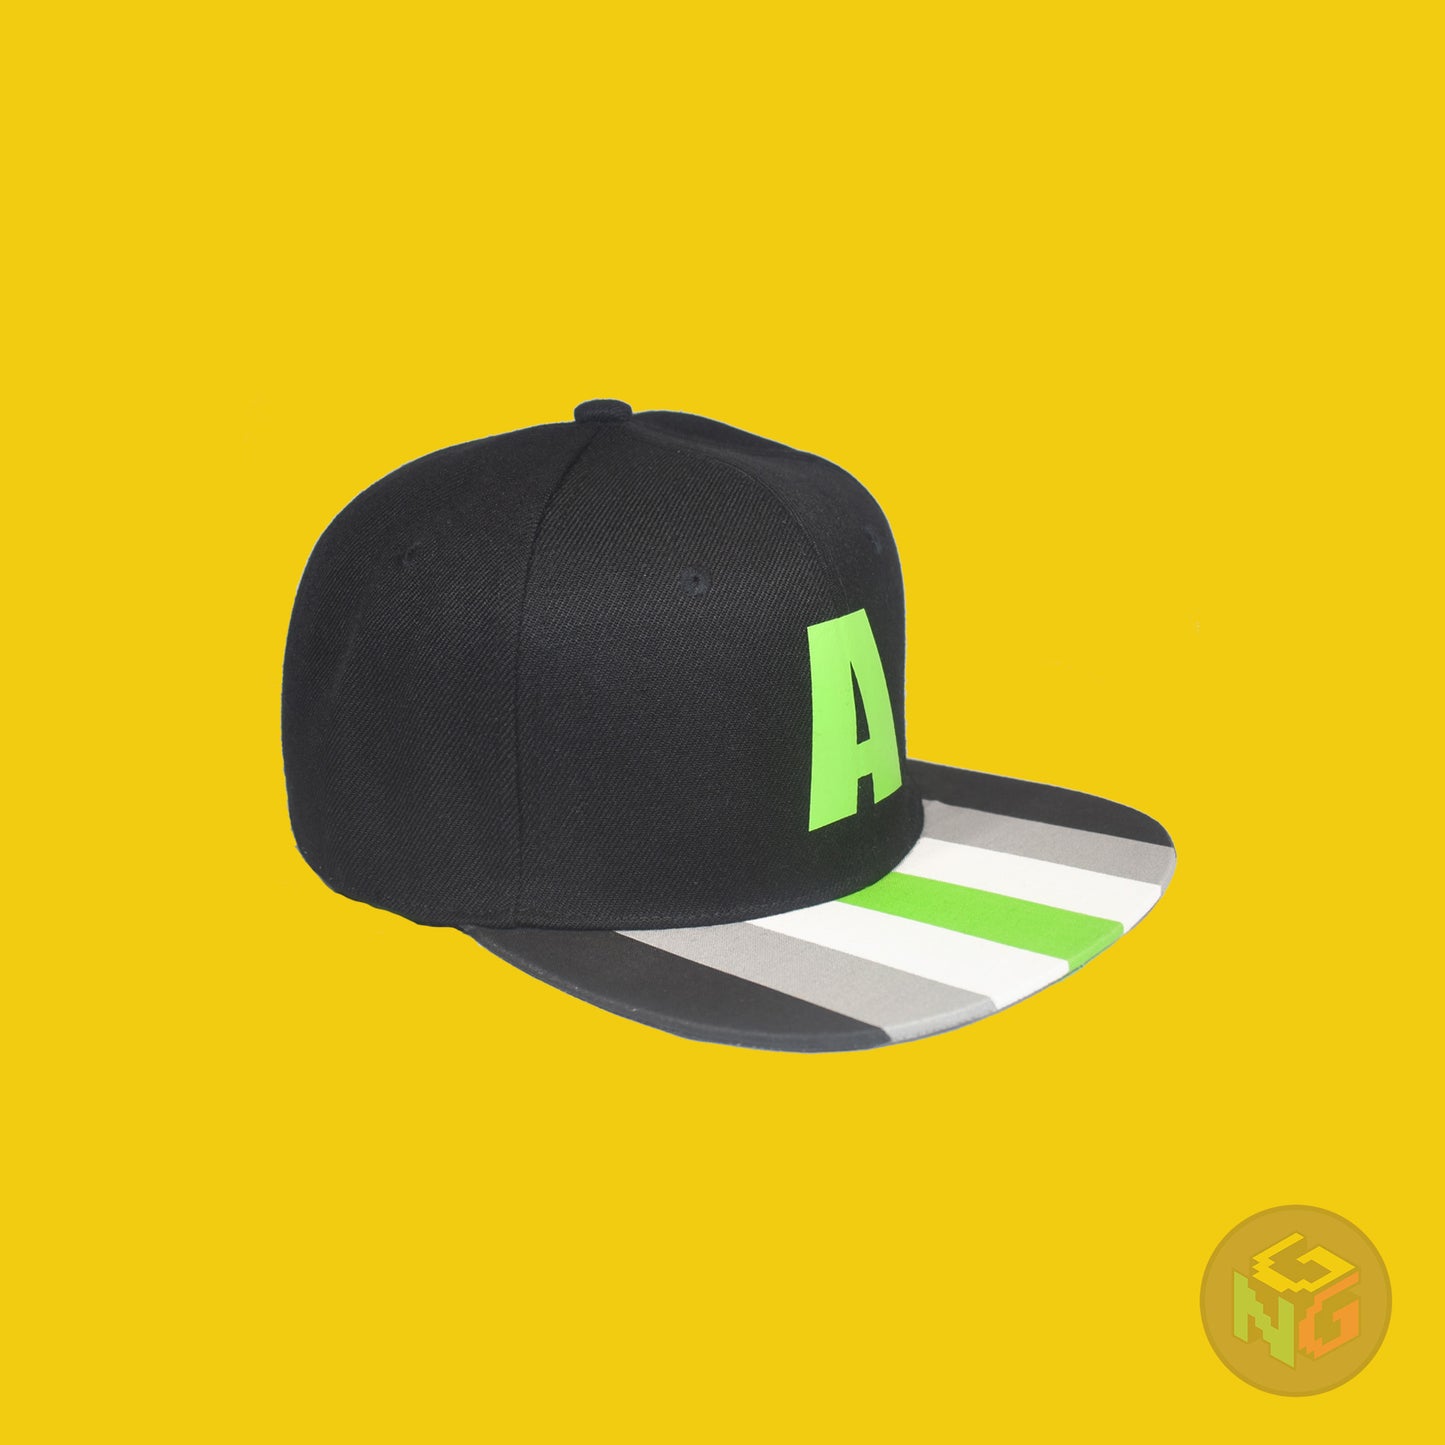 Black flat bill snapback hat. The brim has the agender pride flag on both sides and the front of the hat has a green letter “A”. Front right view